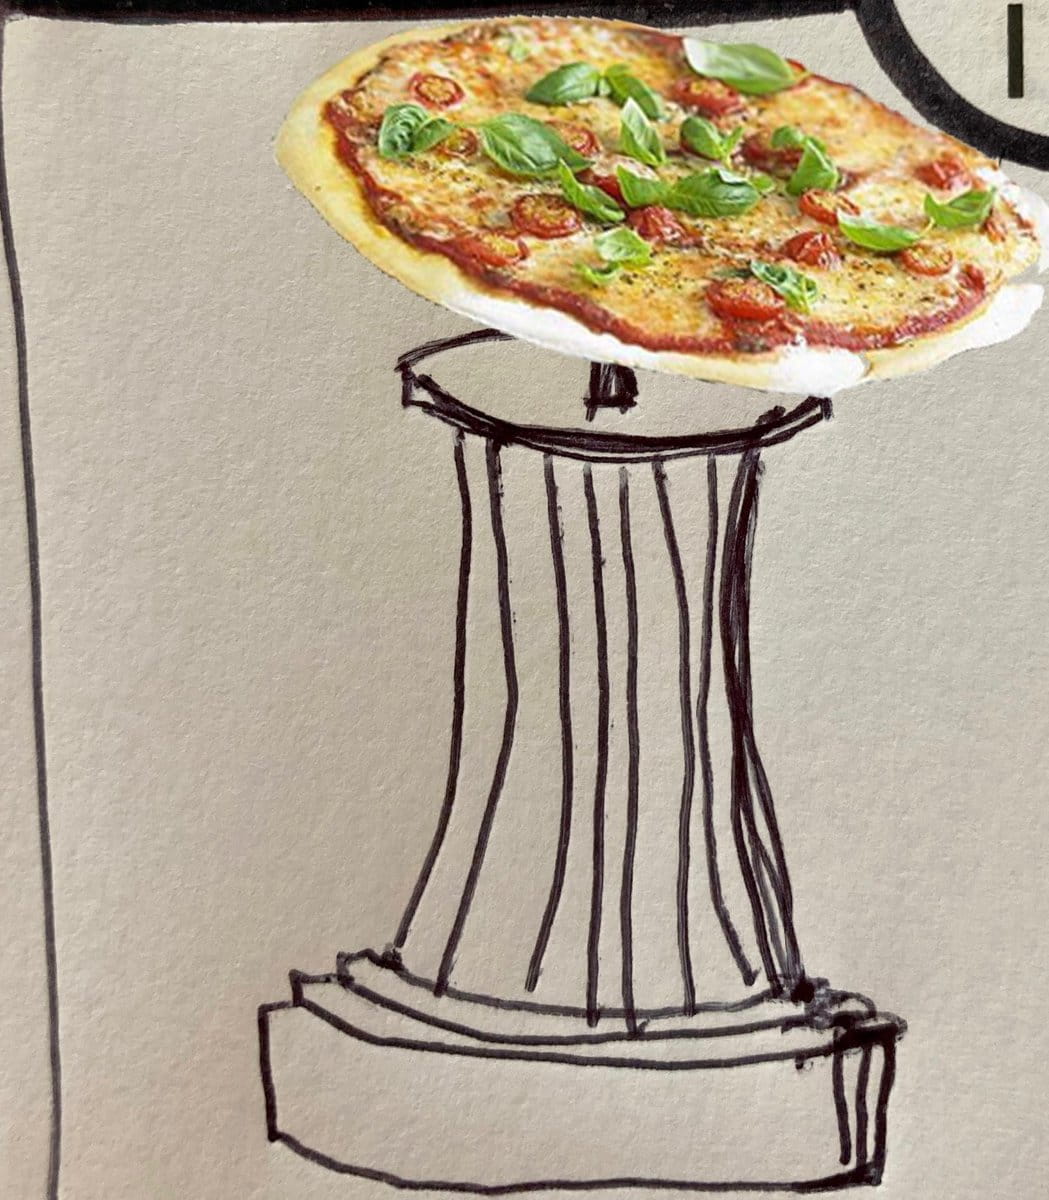 Collage of a pizza on a pedestal